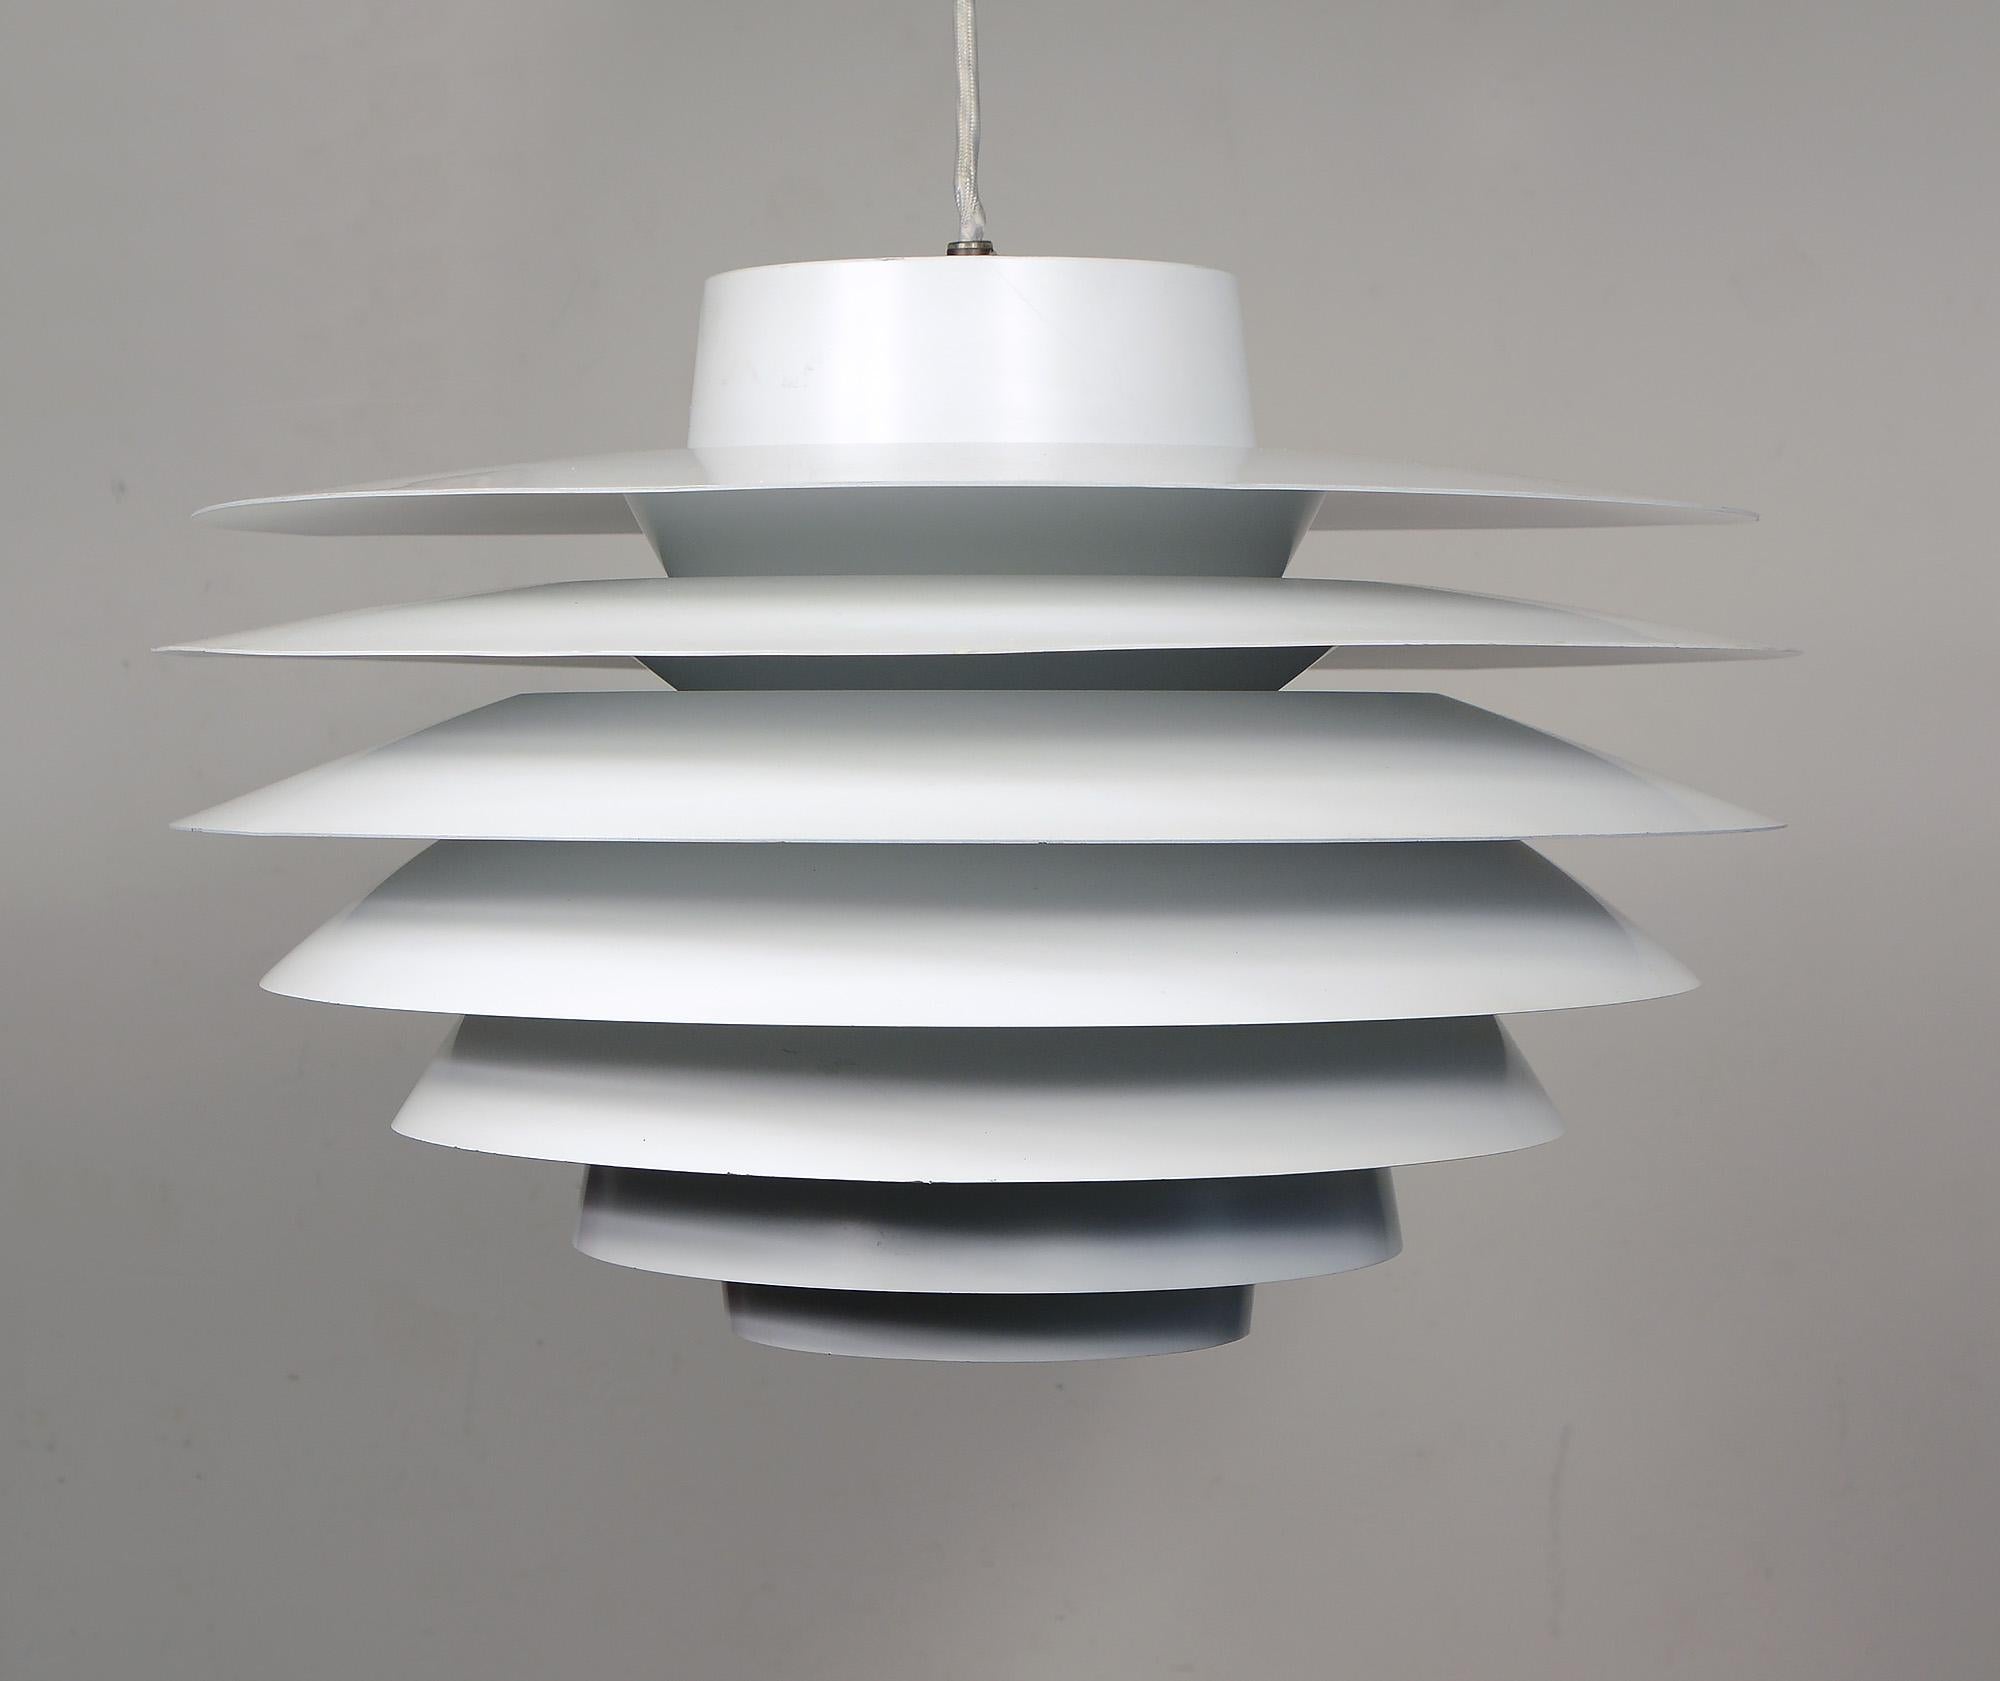 Verona pendant designed by Svend Middelboe in 1968. He was able to design the shades so there are no visible suspensions between the shades - making them almost floating in air. This is the third largest size made. This pendant came out of storage